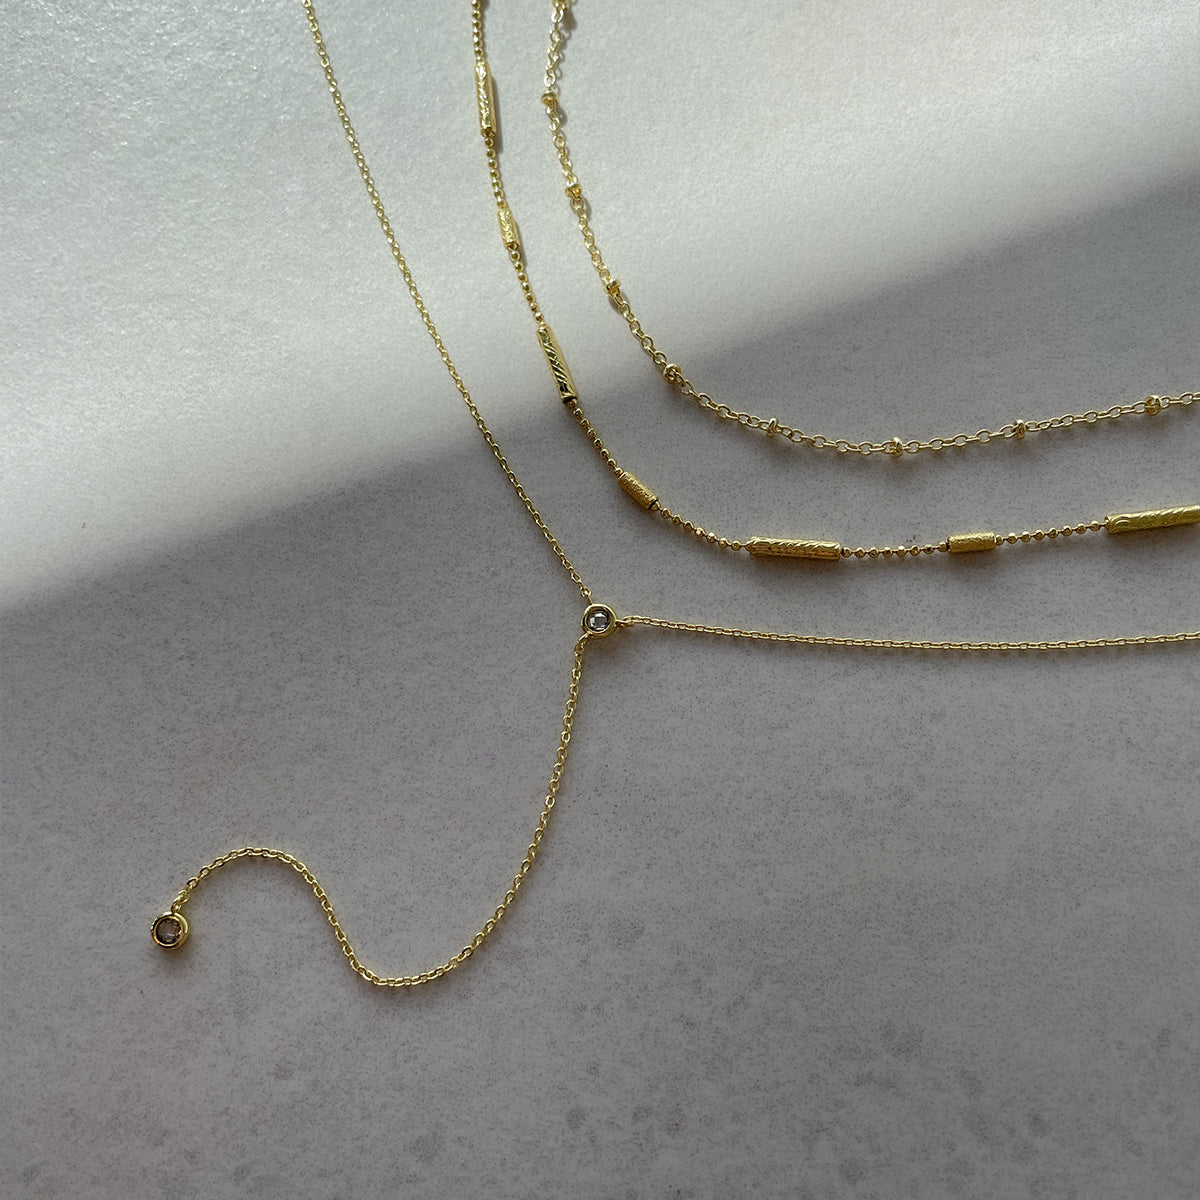 Double Necklace Set, Gold, Silver, Set of 2, Layering Necklaces, Necklace  Set, Layered Set, Delicate, Dainty, Minimalist, Two Necklaces